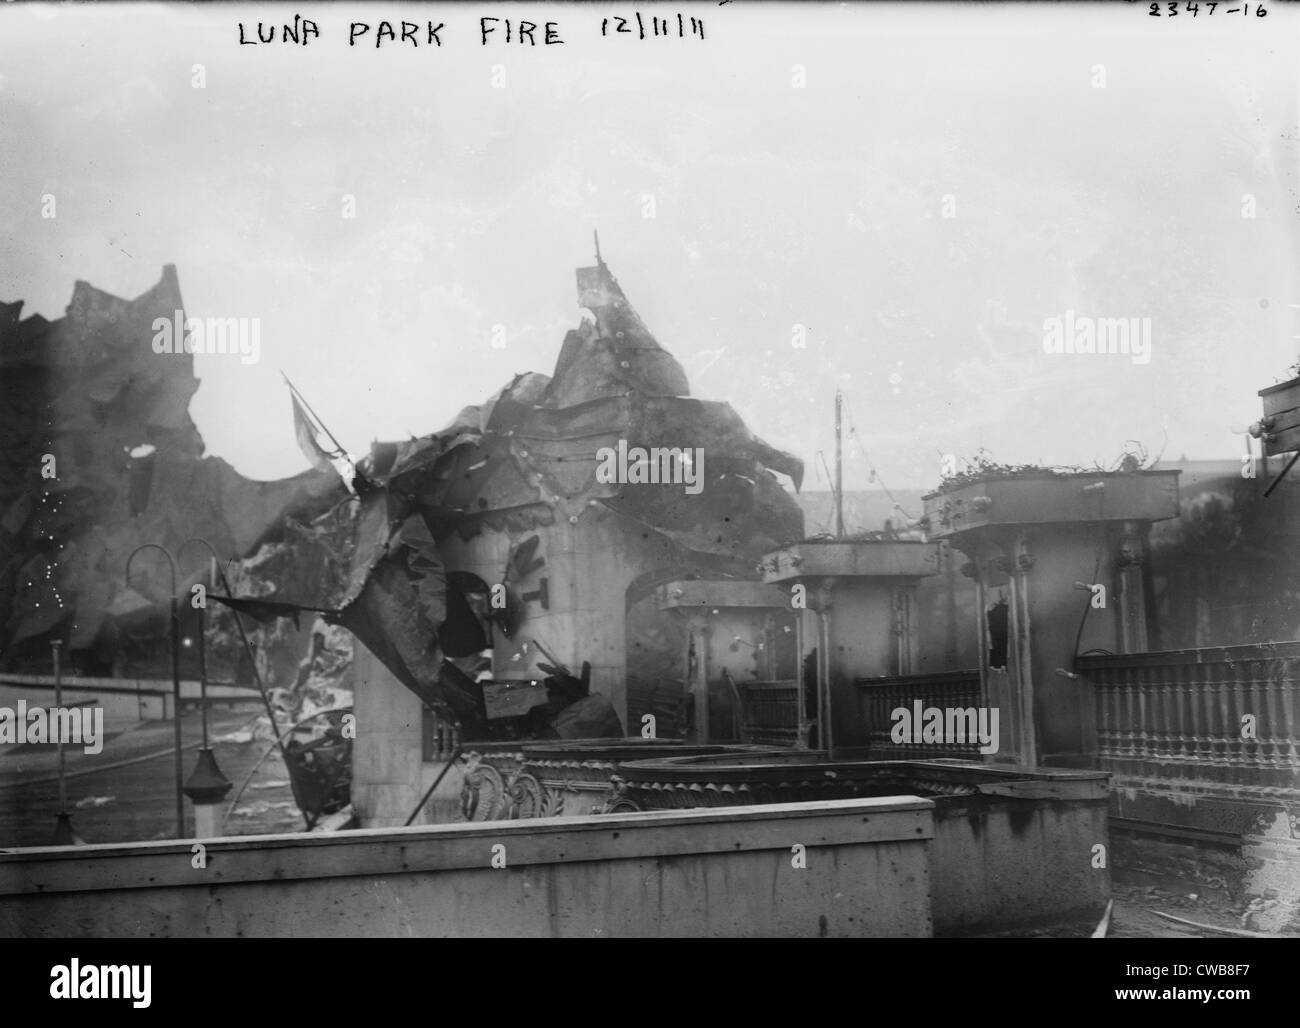 Coney Island, remains of the Alahmbra Restaurant, destroyed by fire, New York, photograph, 1911. Stock Photo